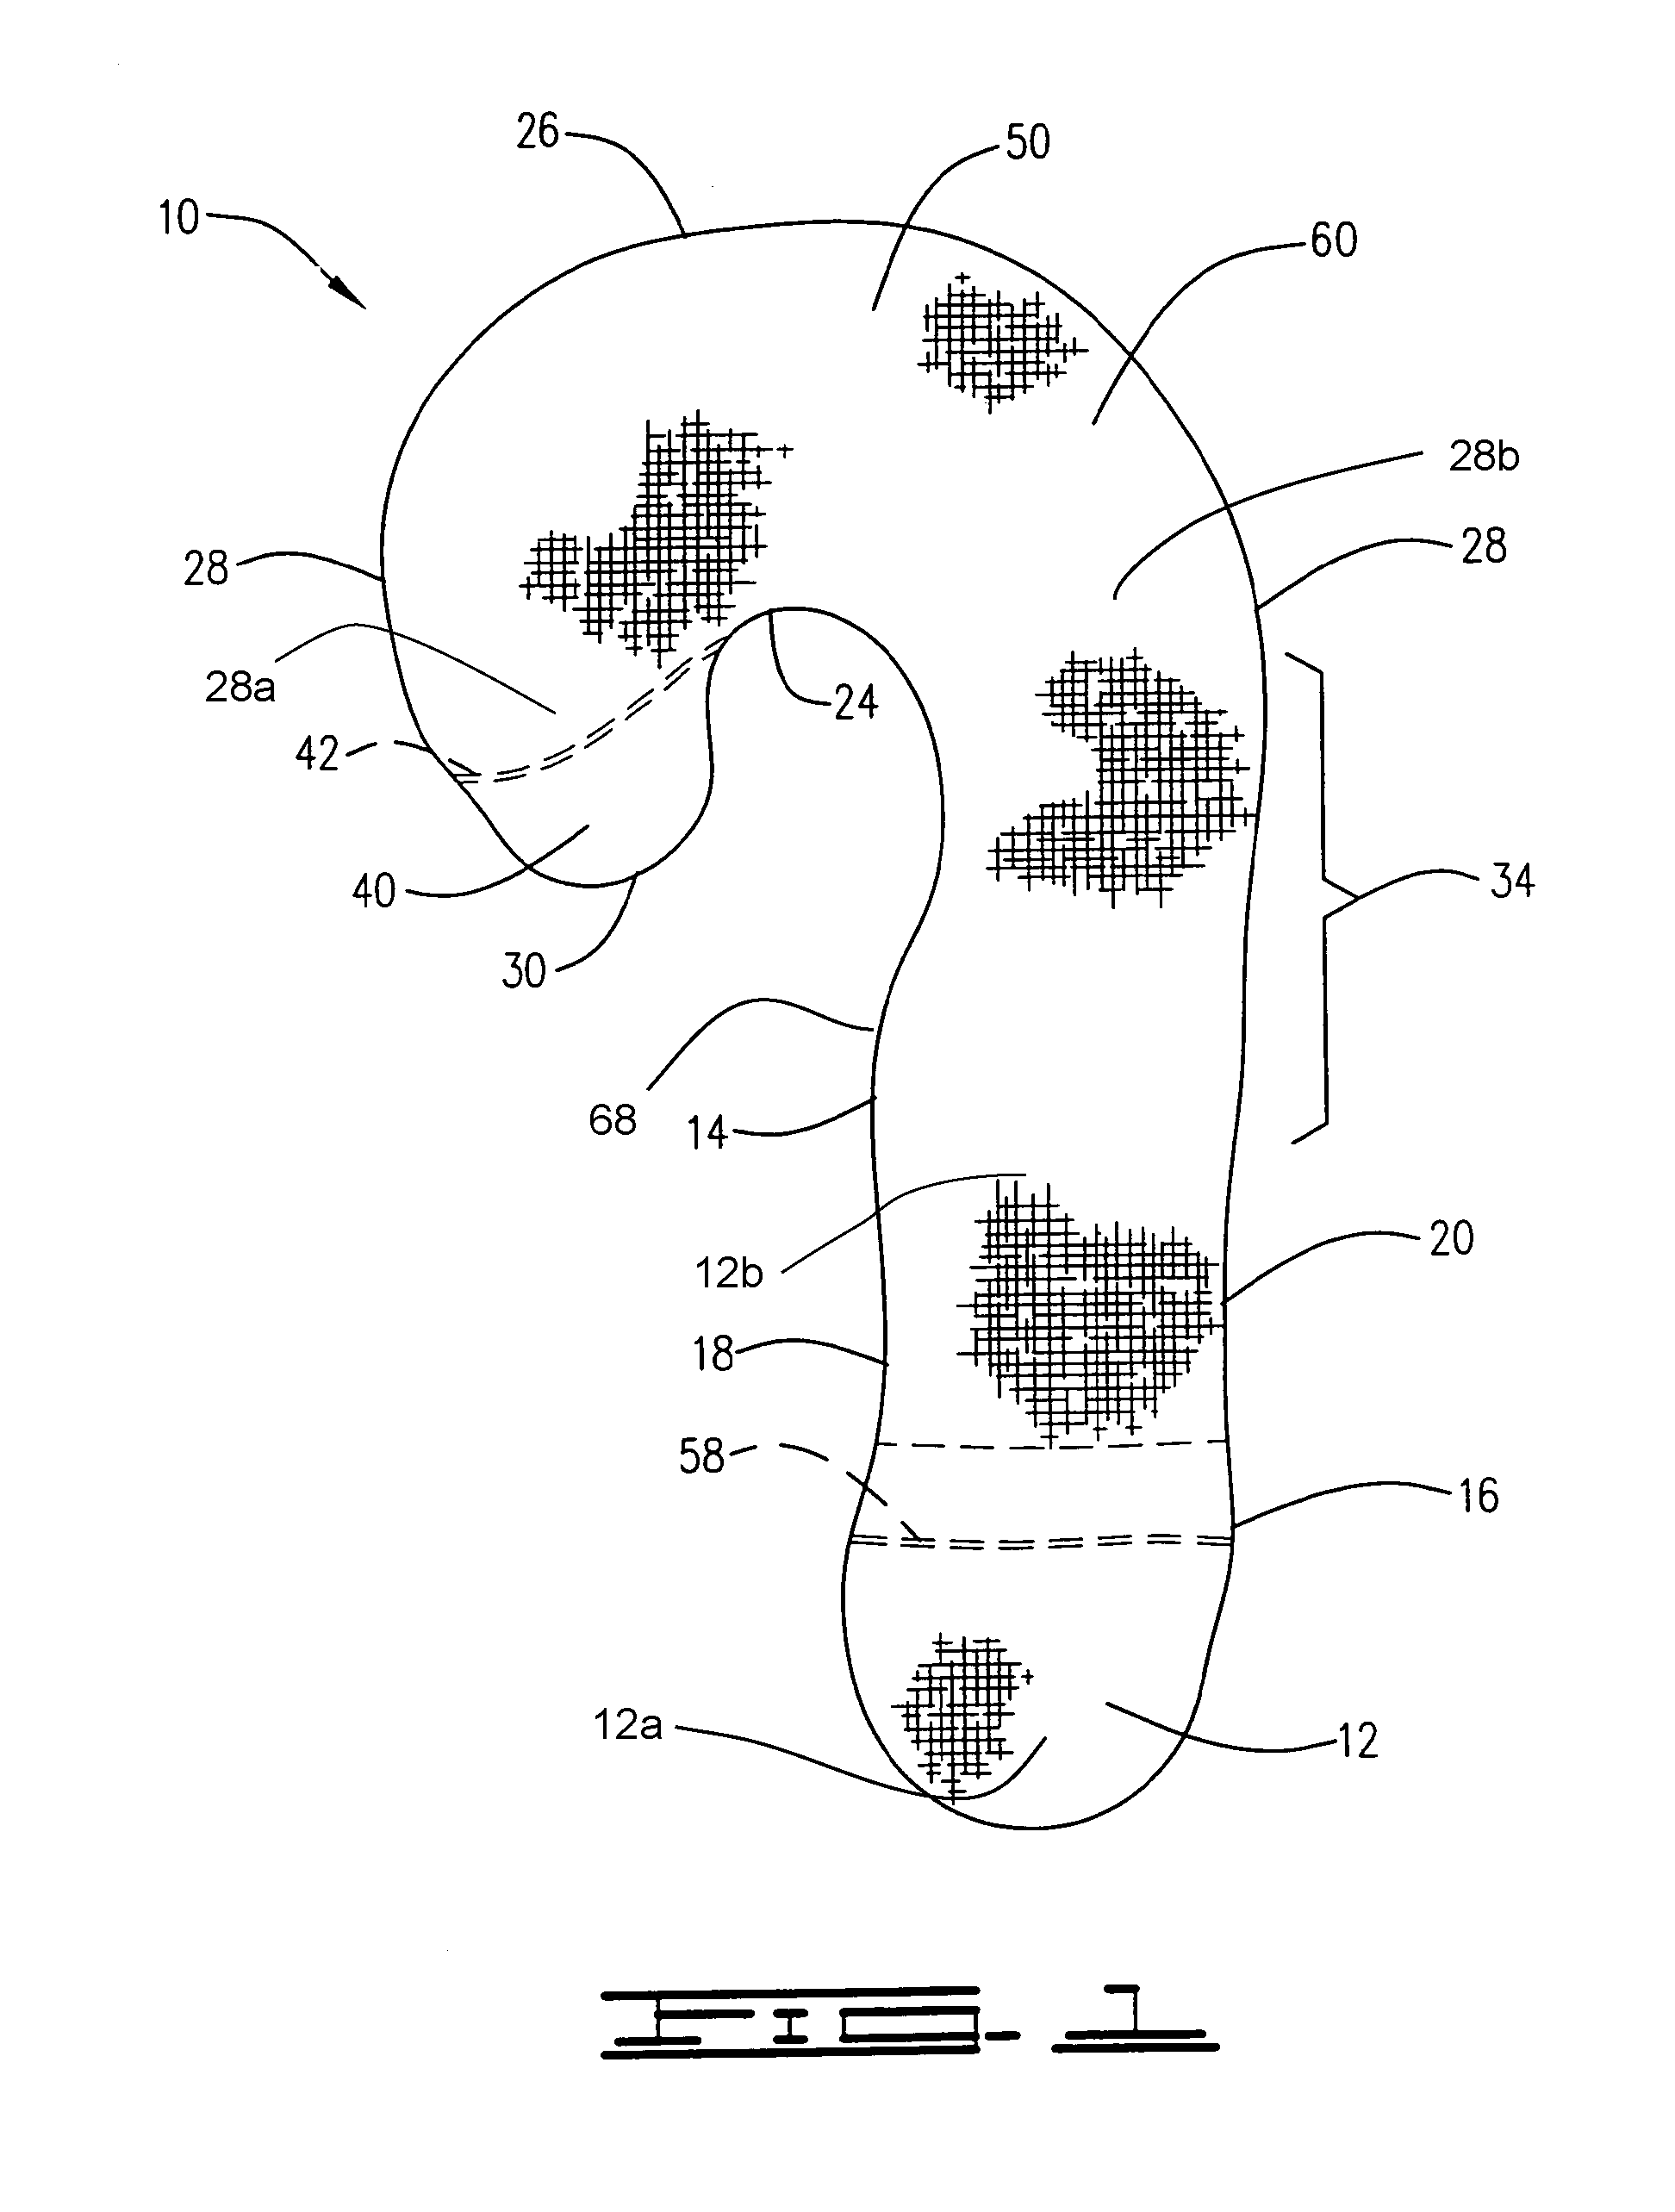 Apparatus and method for question mark-shaped body pillow and support system